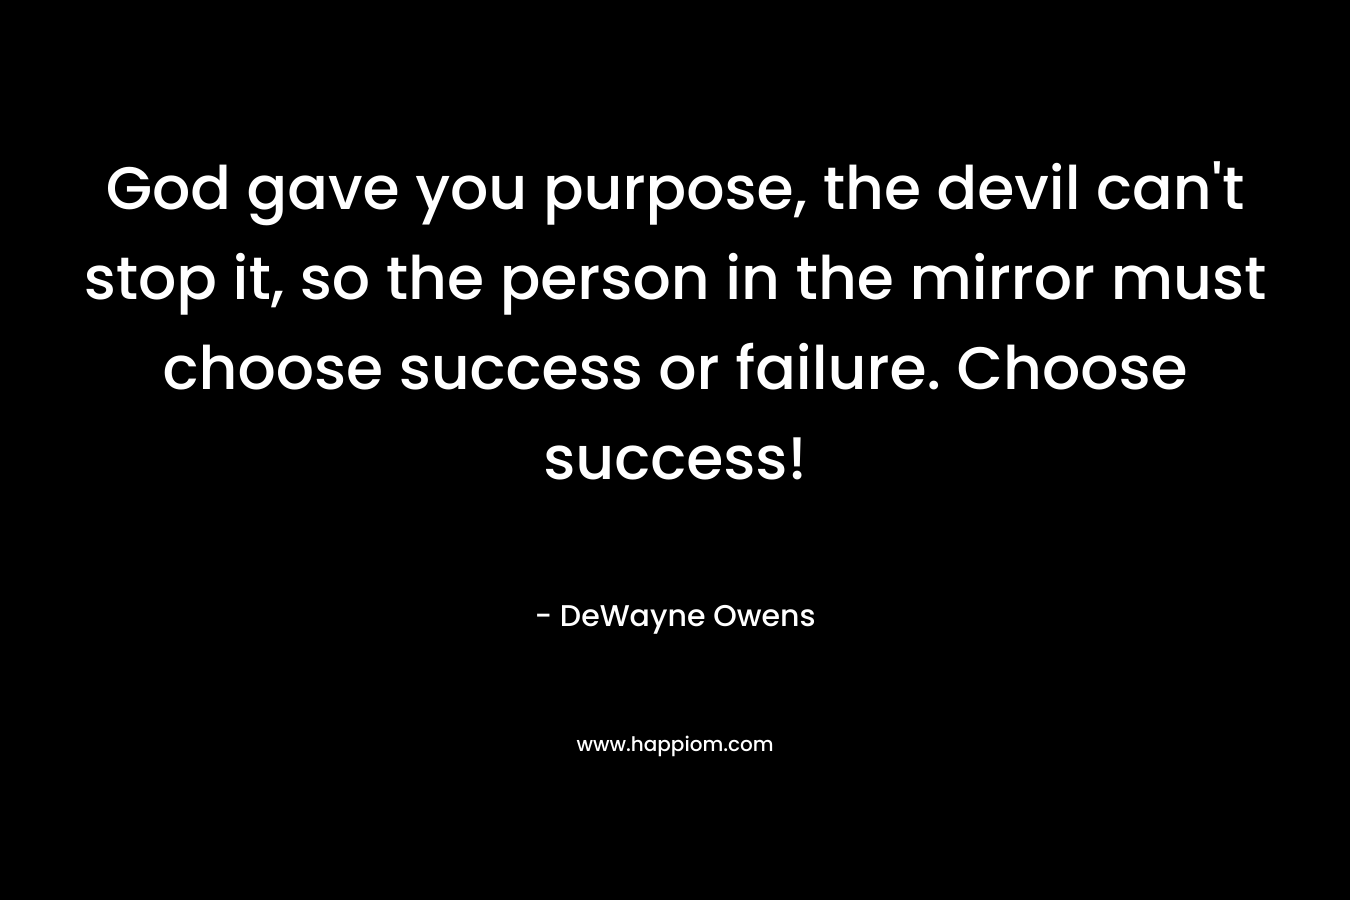 God gave you purpose, the devil can’t stop it, so the person in the mirror must choose success or failure. Choose success! – DeWayne Owens